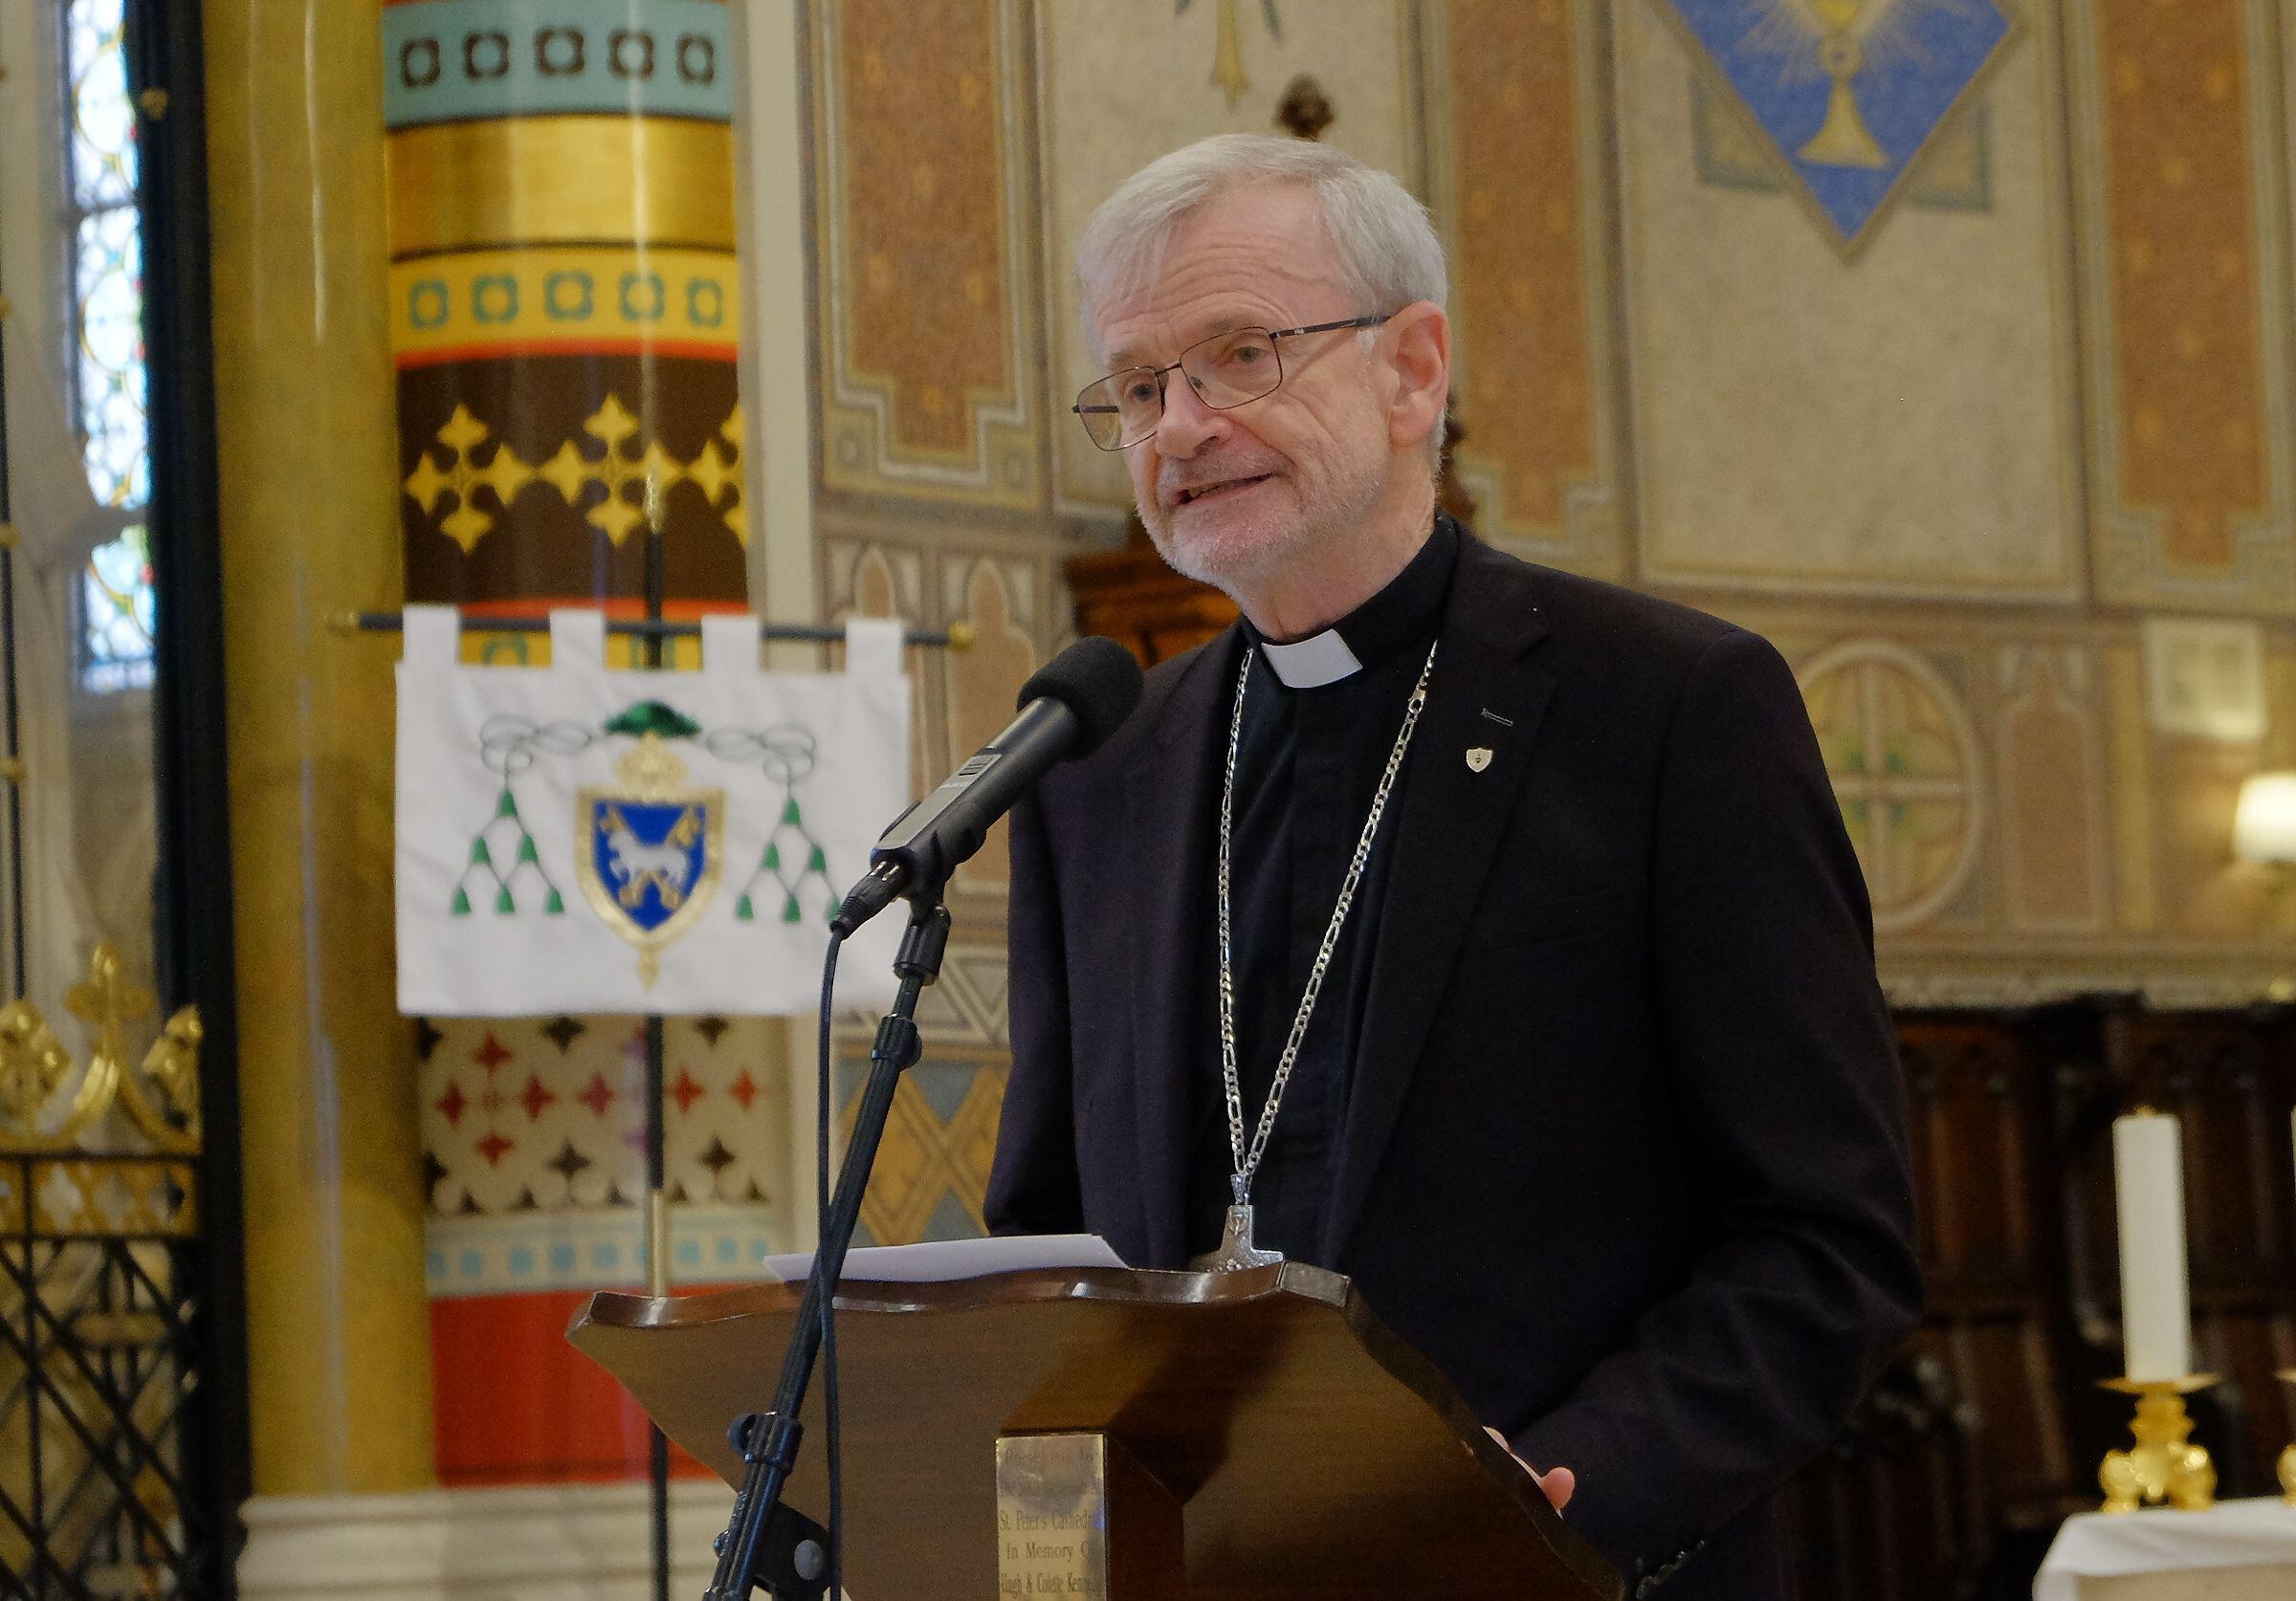 New bishop for Down and Connor as Church leaders welcome return of devolved government